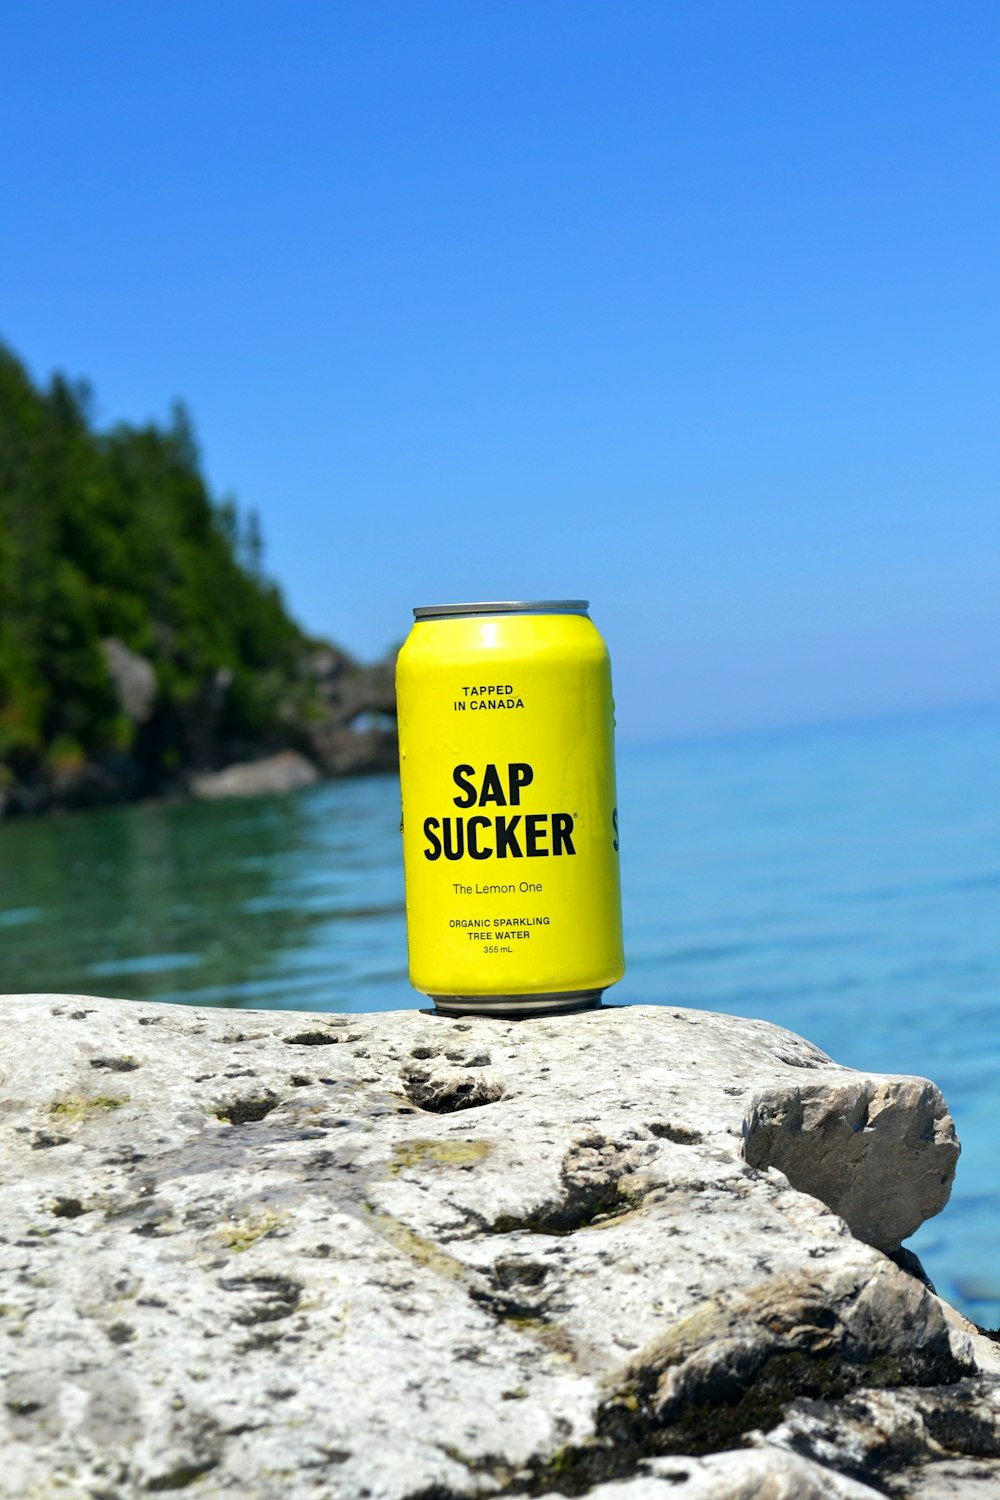 yellow and green can on gray rock near body of water during daytime